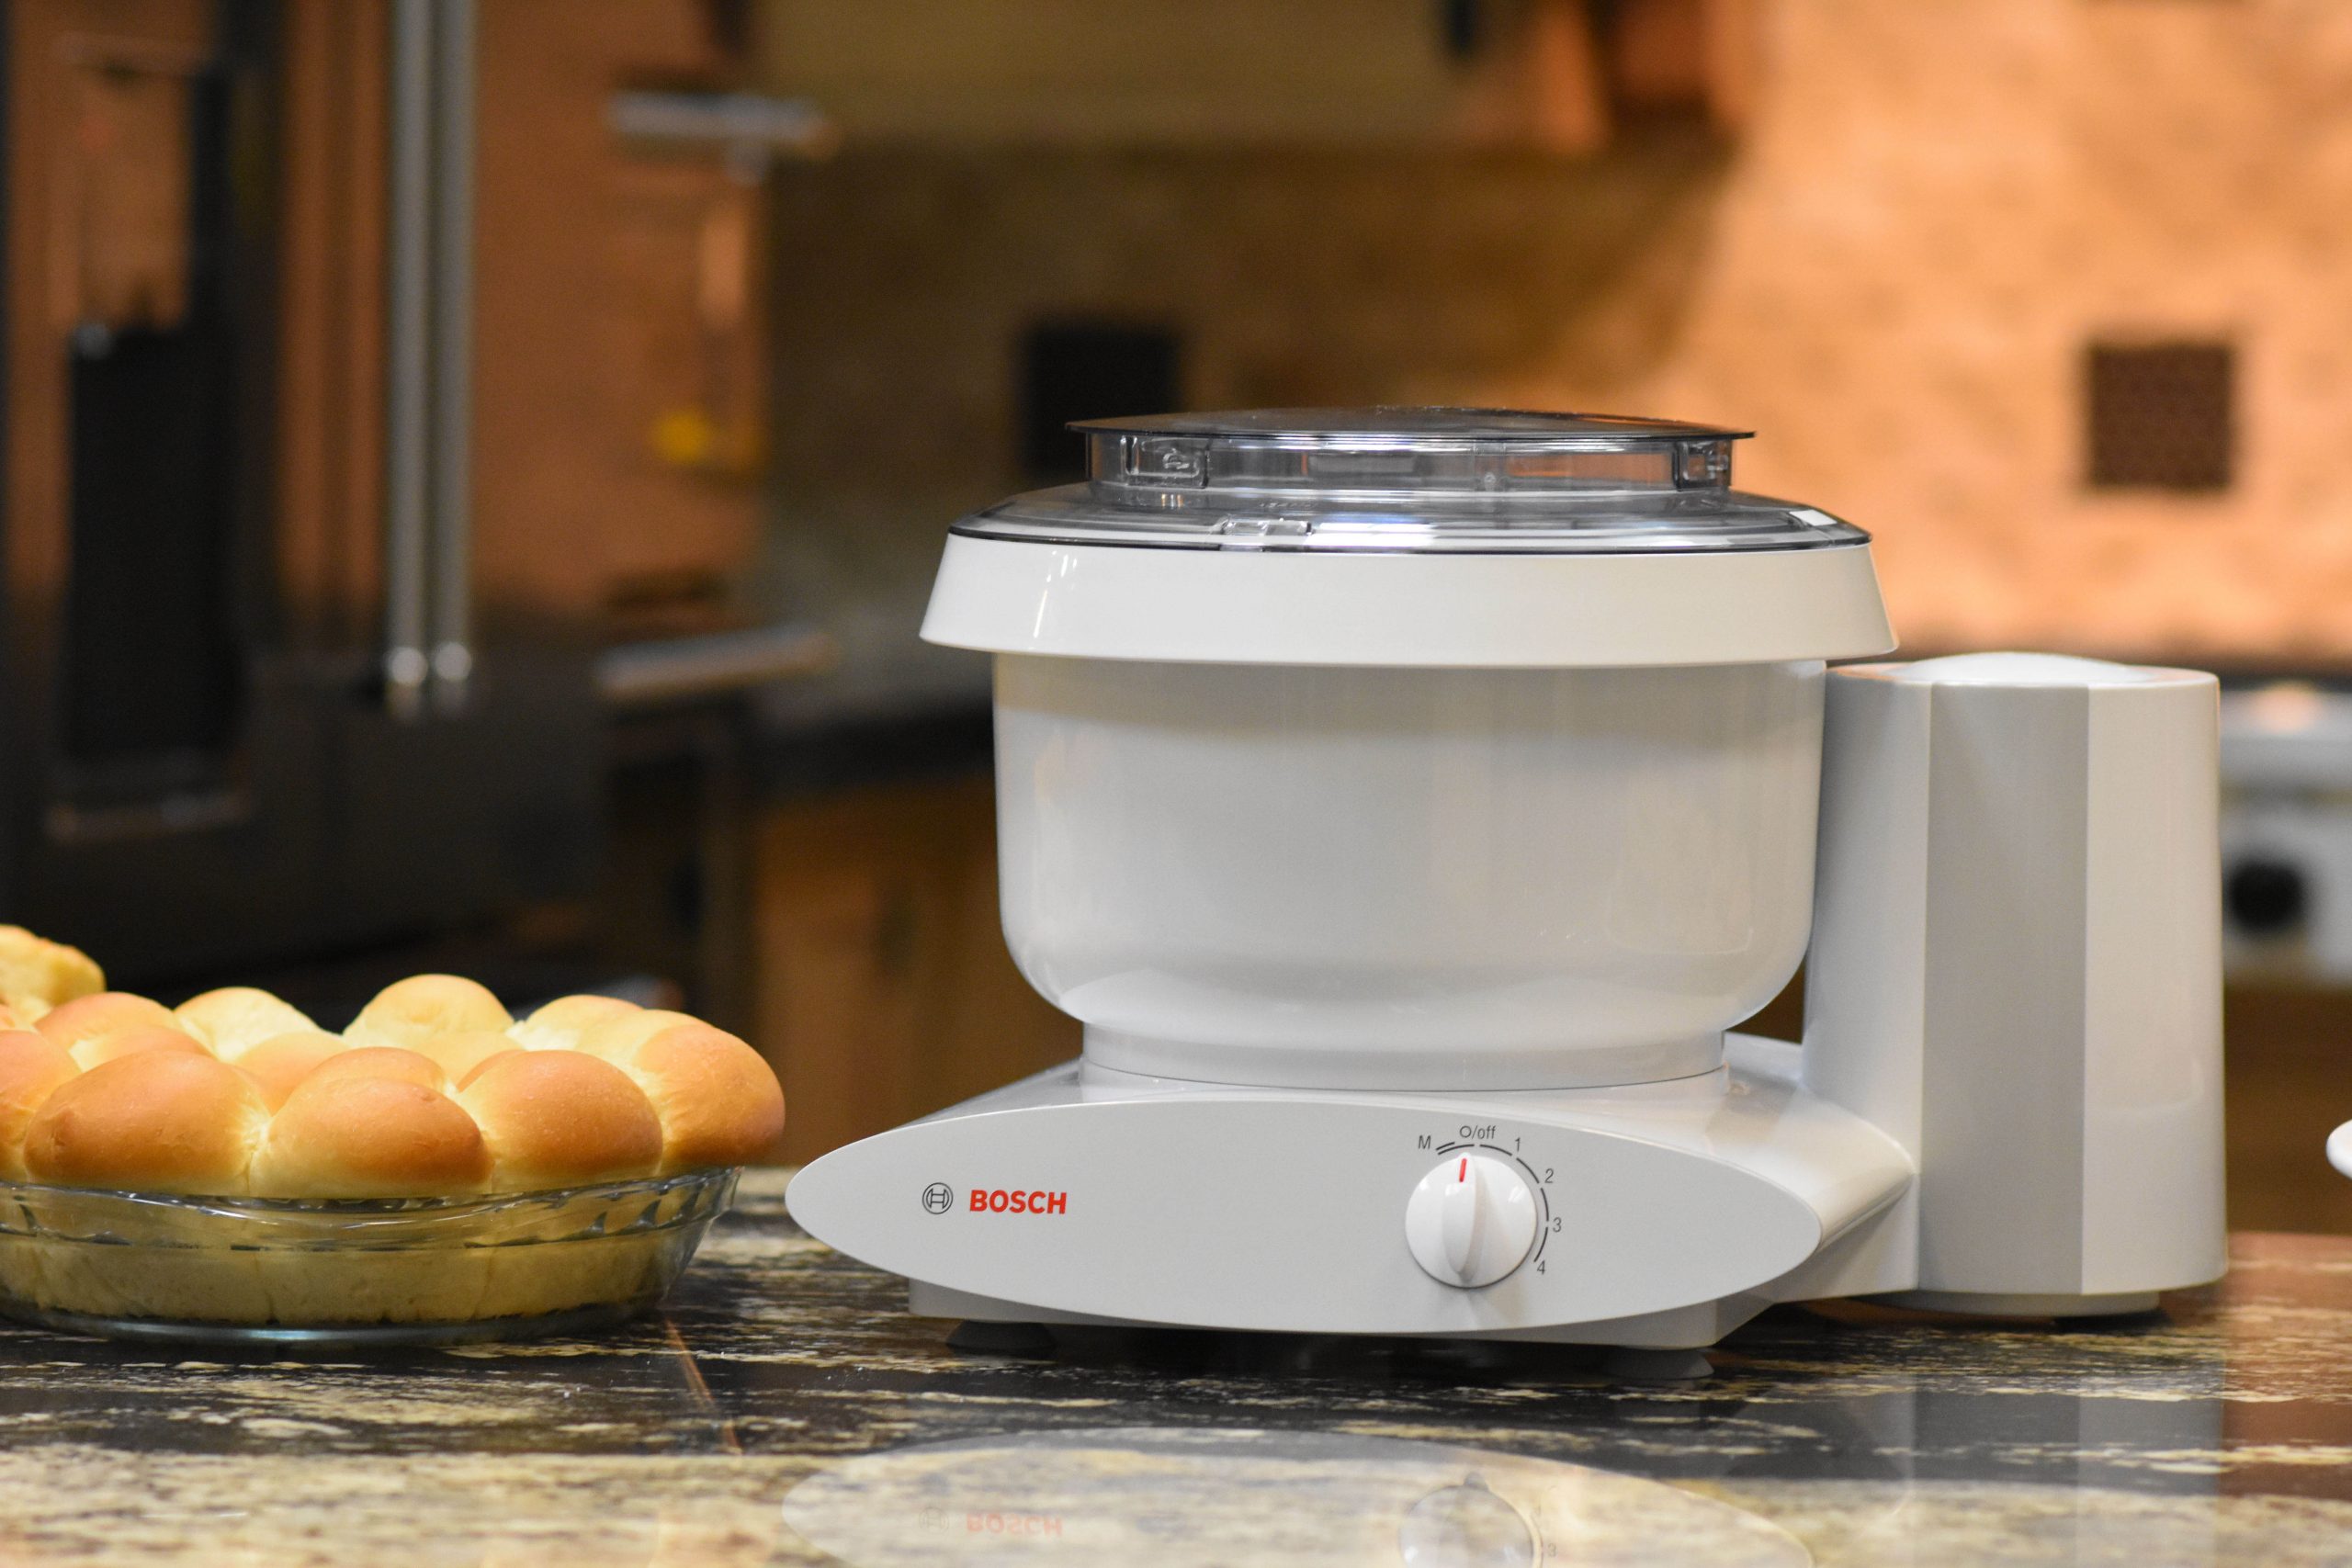 Bosch Mixers: Are They Worth the Money? We Say YES! Here's Why.